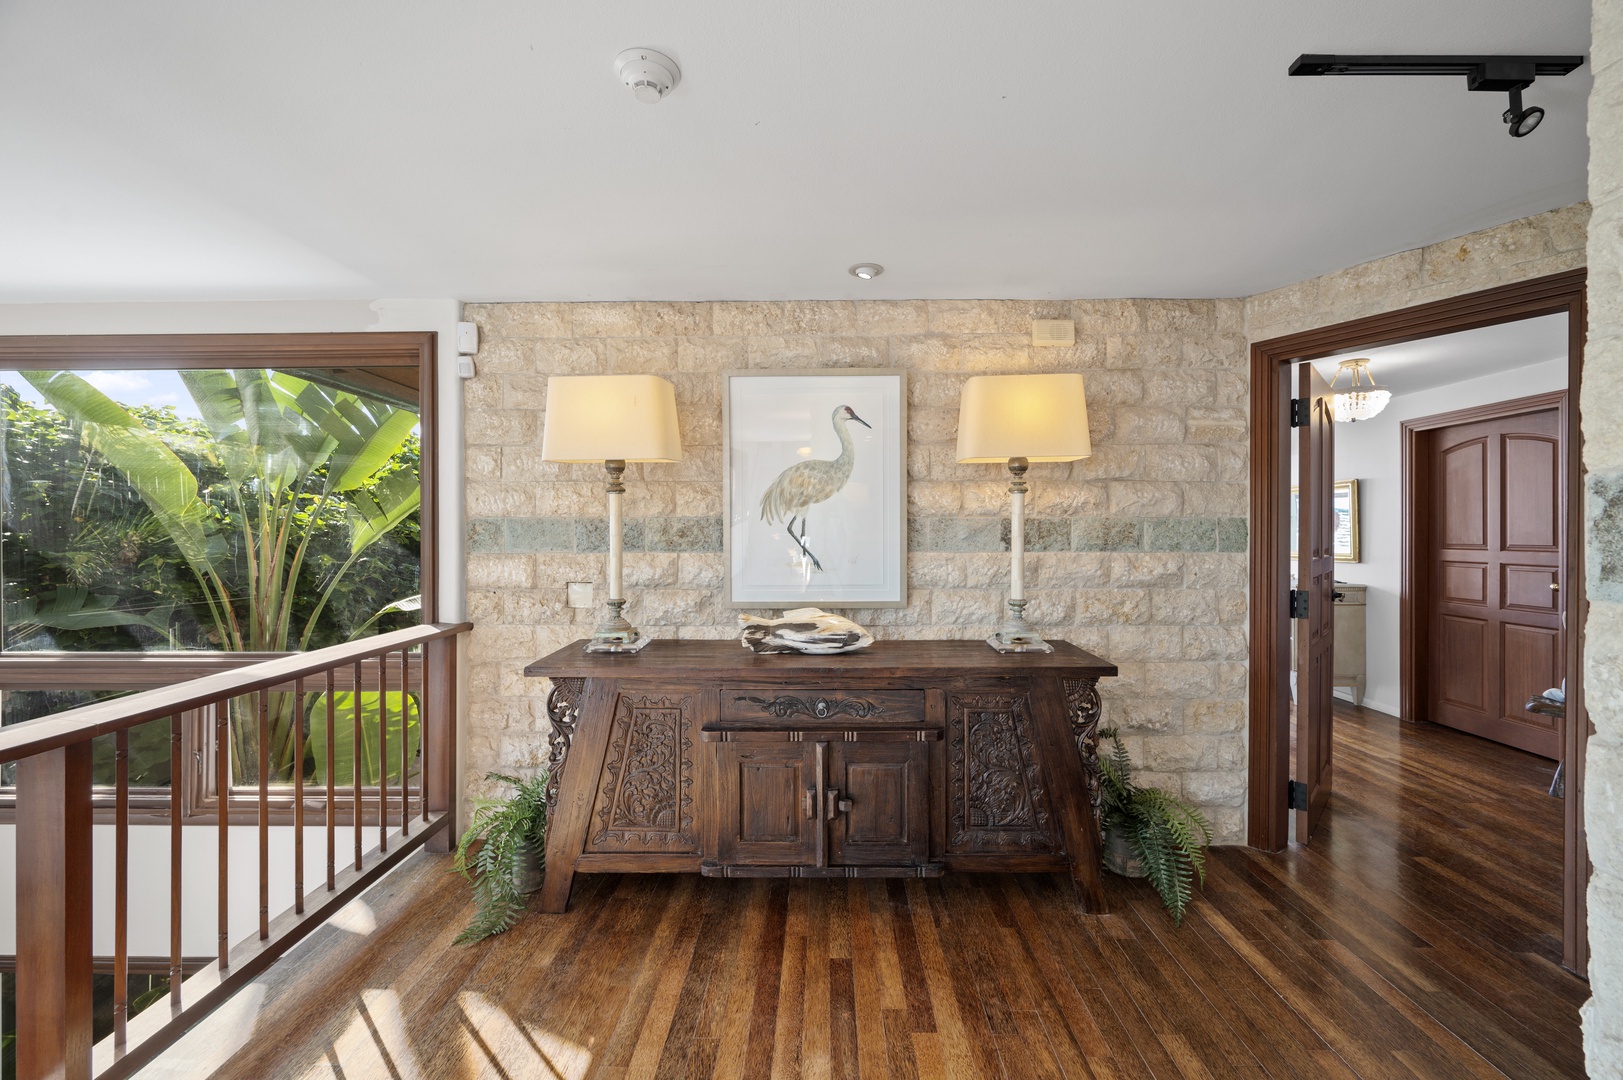 Honolulu Vacation Rentals, Kaiko'o Villa* - Just one of the stunning pieces of furniture you'll be surrounded by